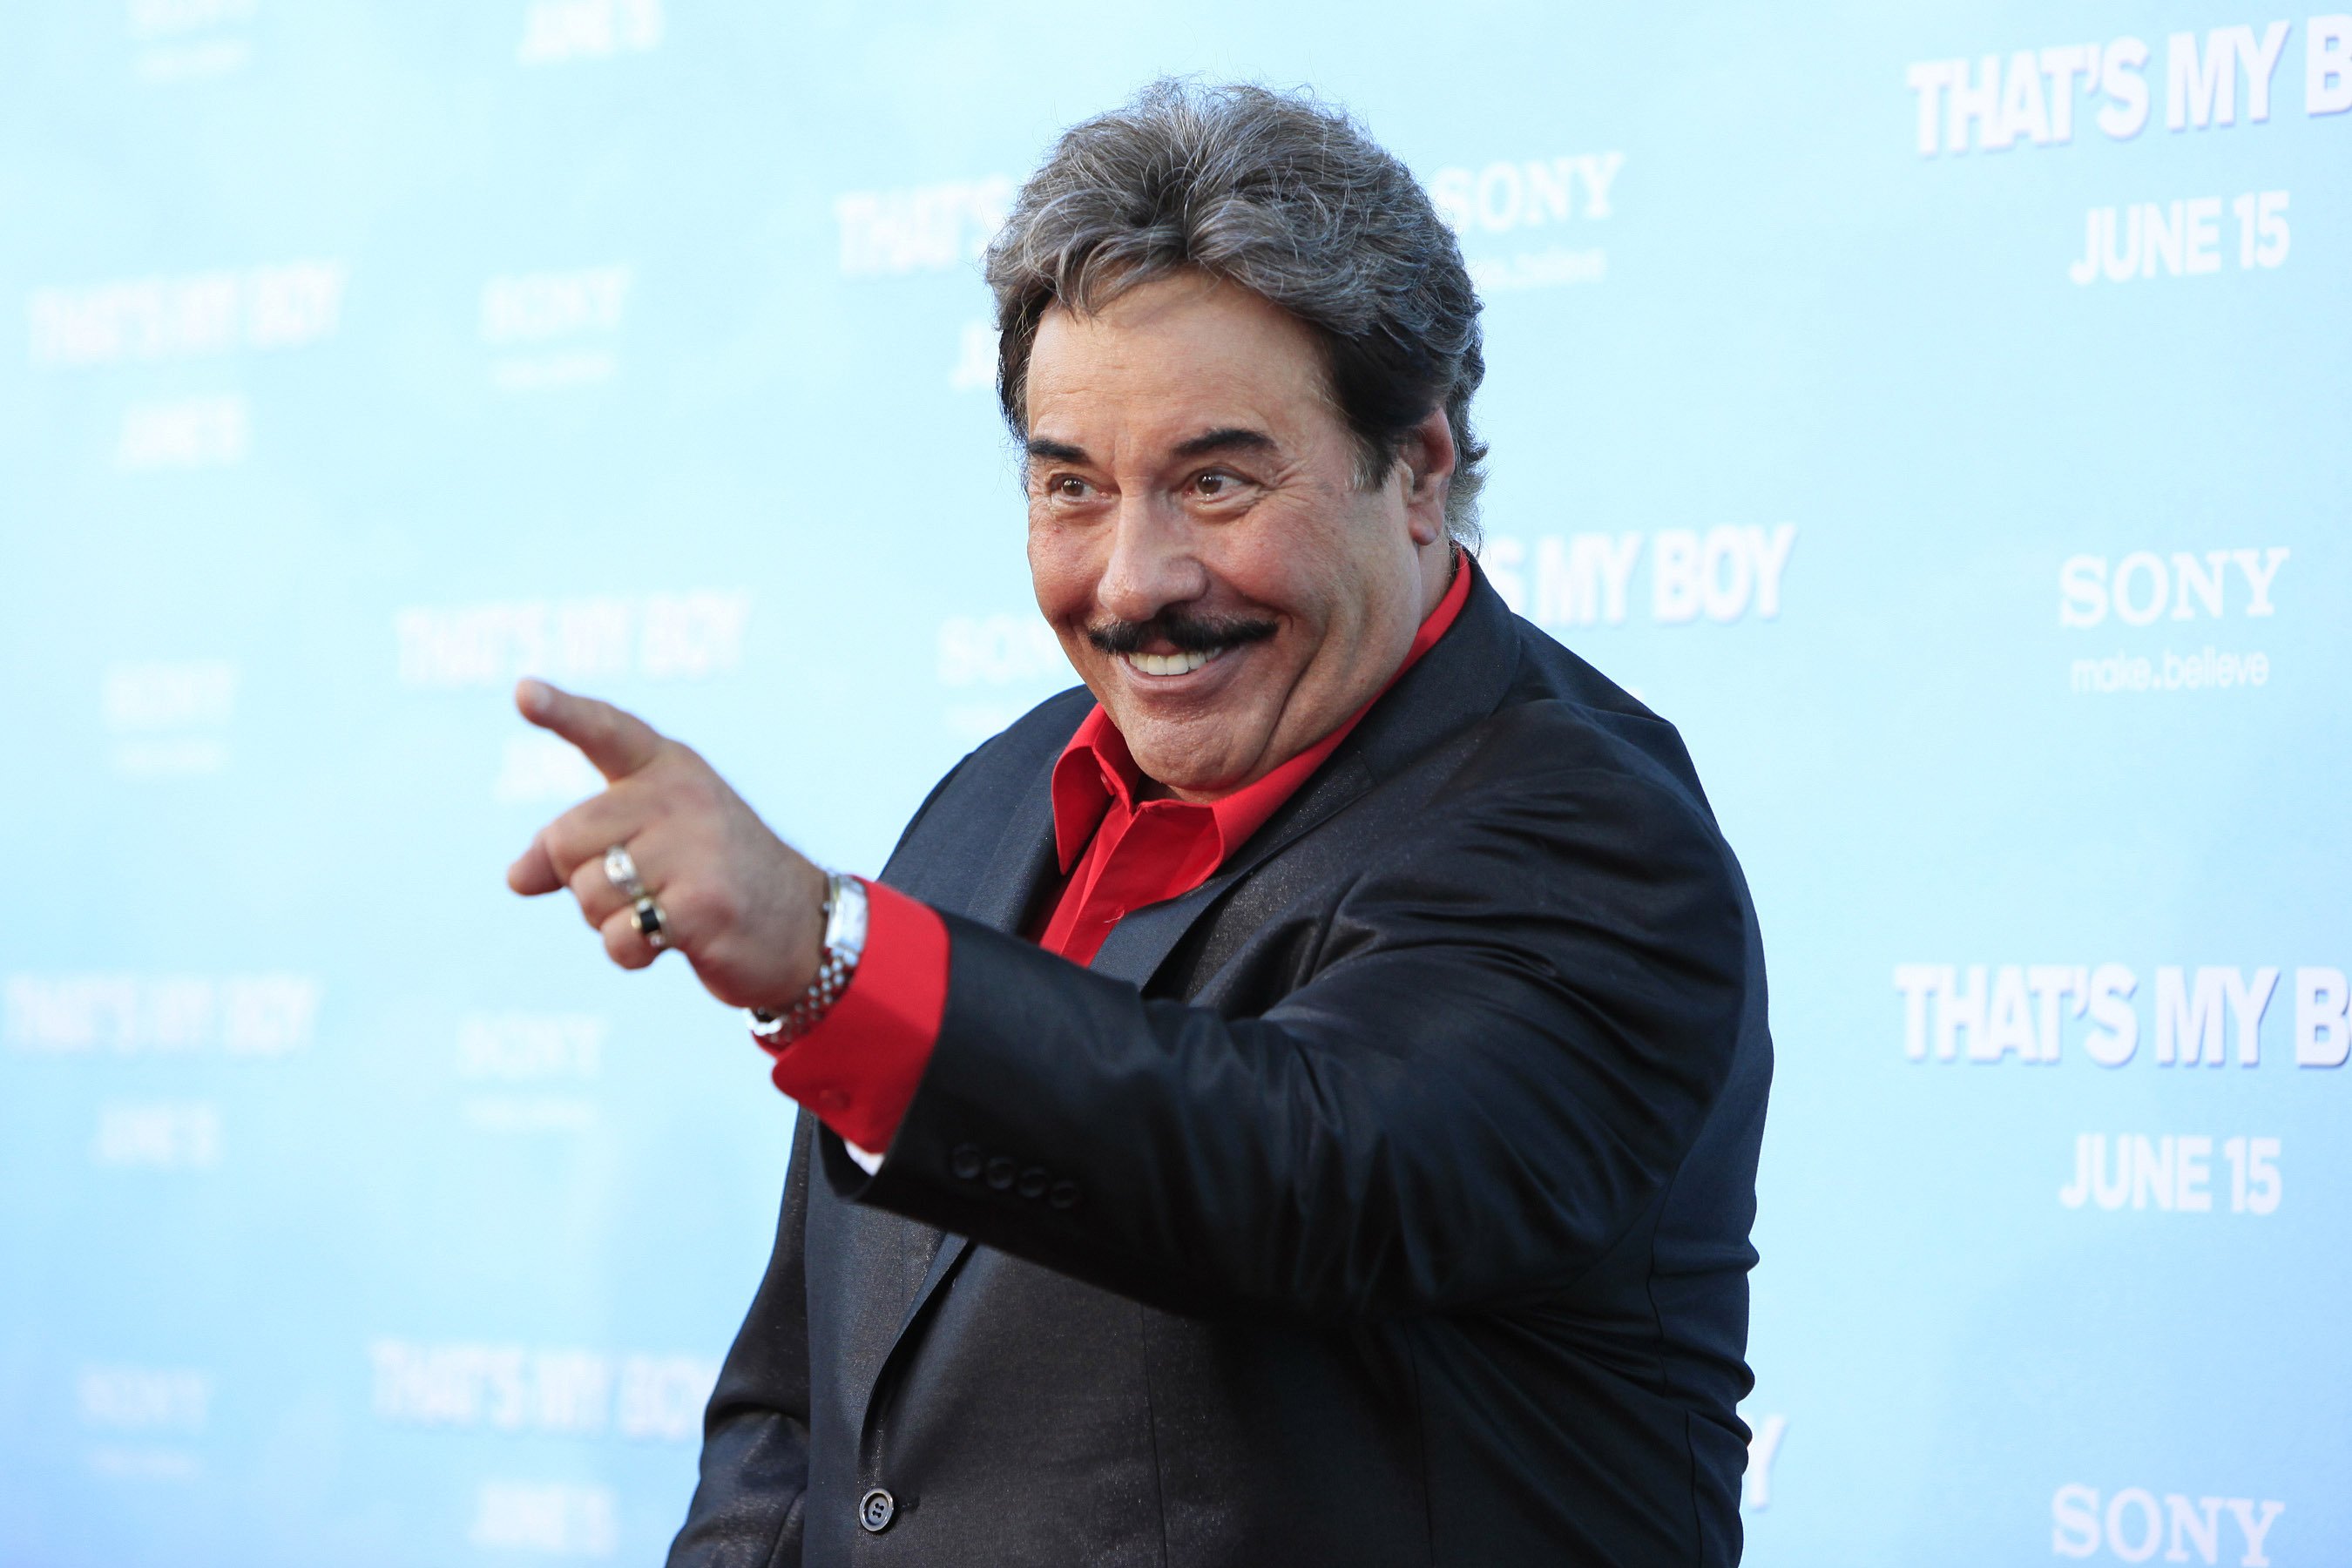 Tony Orlando at the premiere of Columbia Pictures' 'That's My Boy' at the Regency Village Theater on June 4, 2012 in Los Angeles, California | Photo: Shutterstock